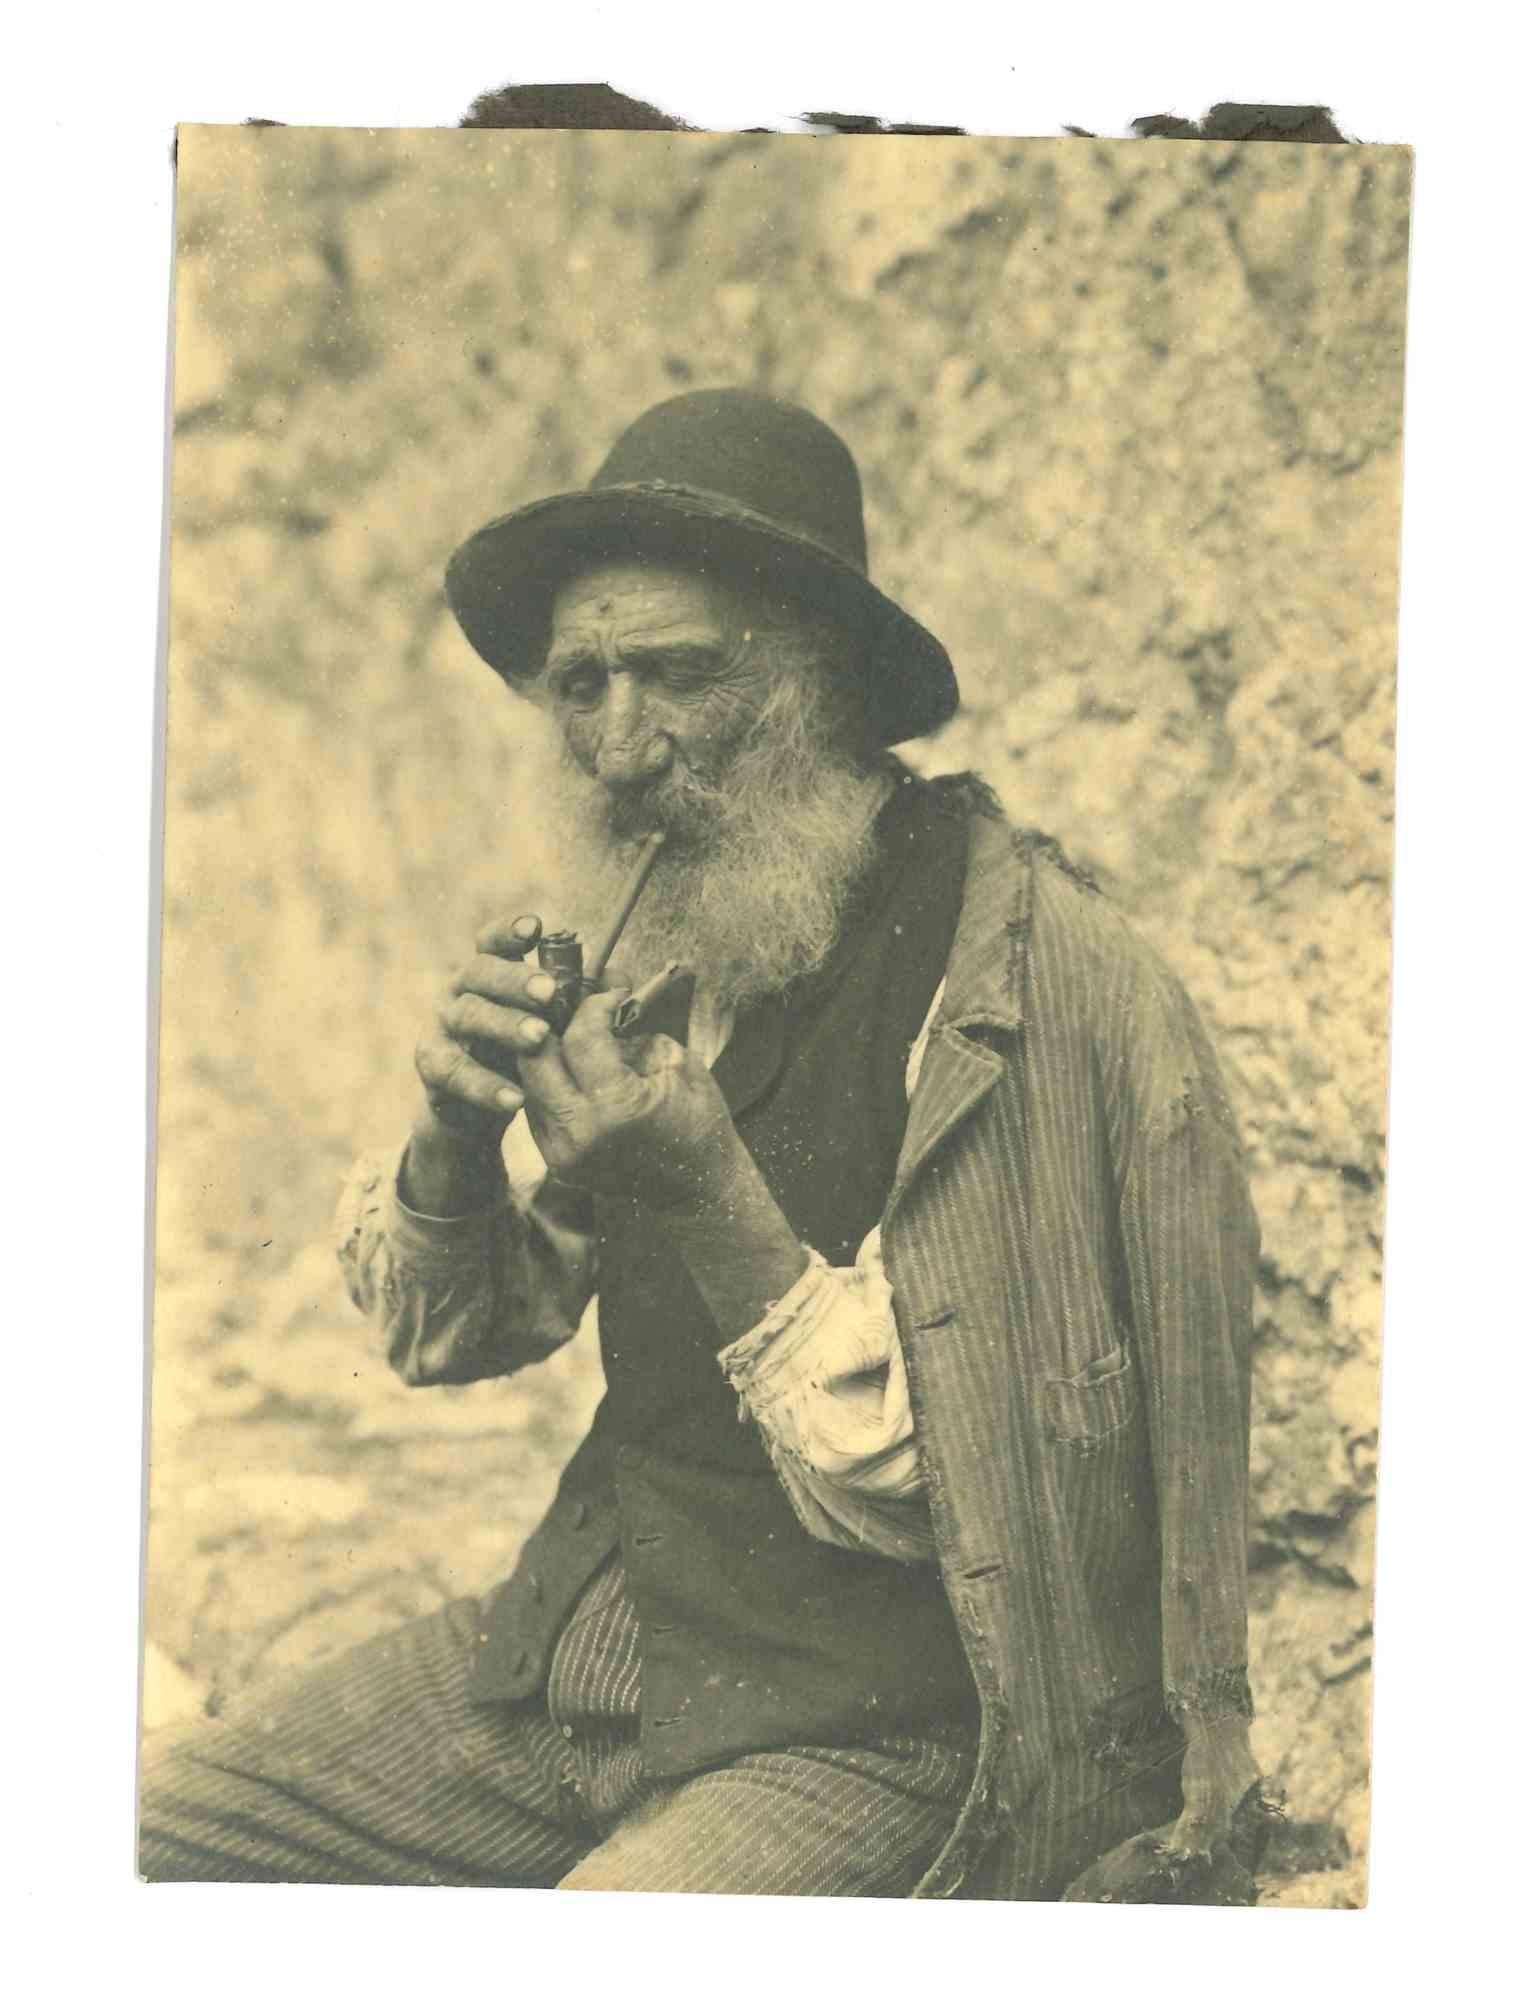 Unknown Portrait Photograph - The Old Days - Smoking - Early 20th Century